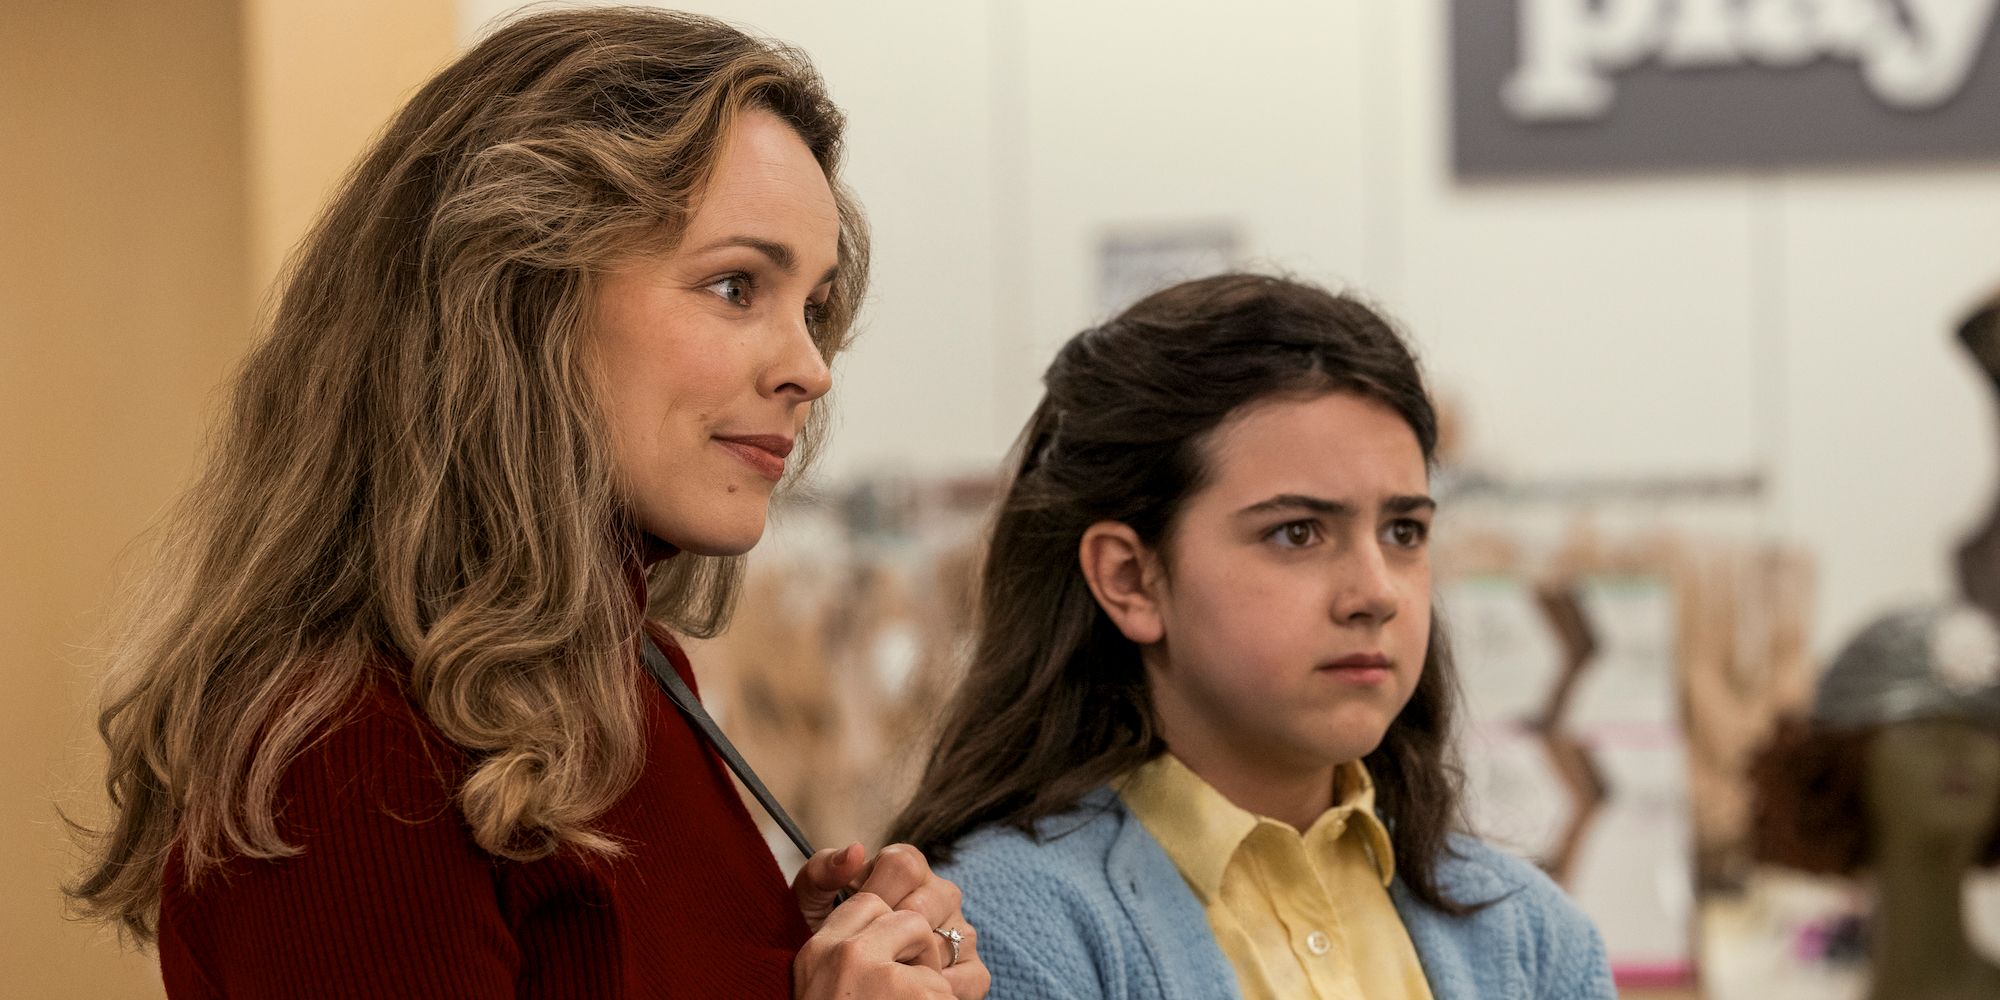 Rachel McAdams as Barbara and Abby Ryder Fortson as Margaret standing in a store in Are You There God? It's Me, Margaret